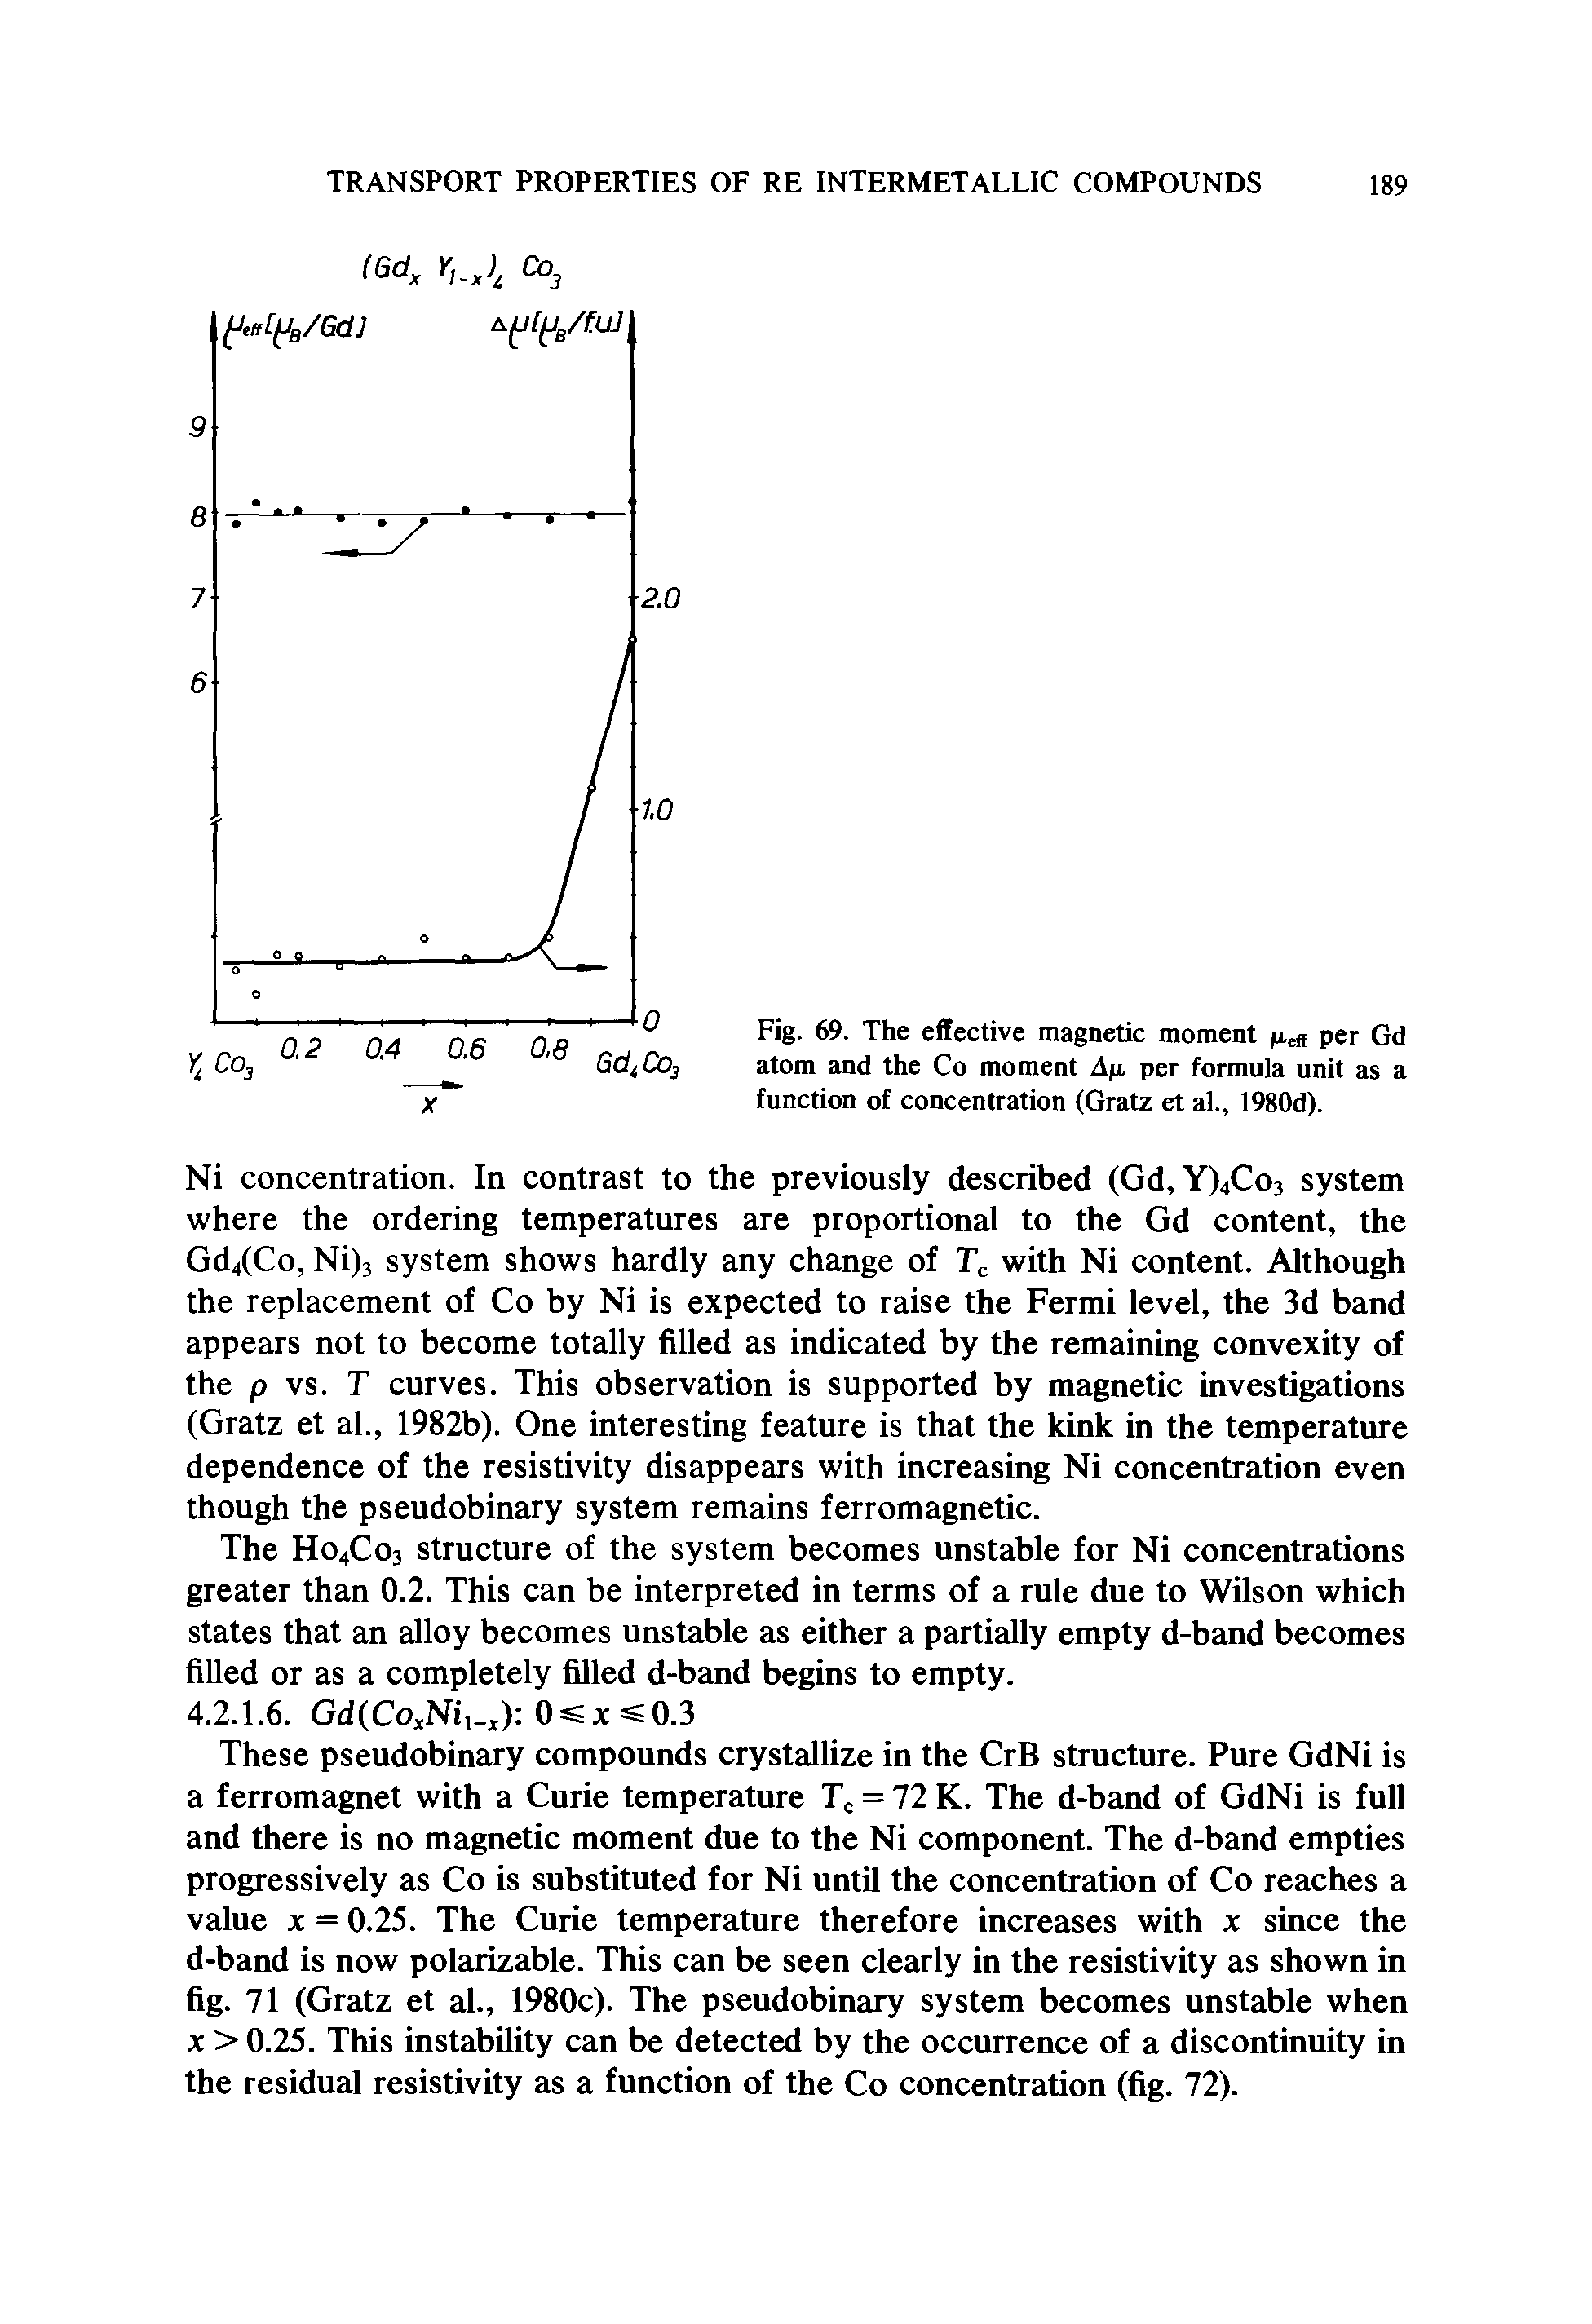 Fig. 69. The effective magnetic moment (1. per Gd atom and the Co moment An per formula unit as a function of concentration (Gratz et al., 1980d).